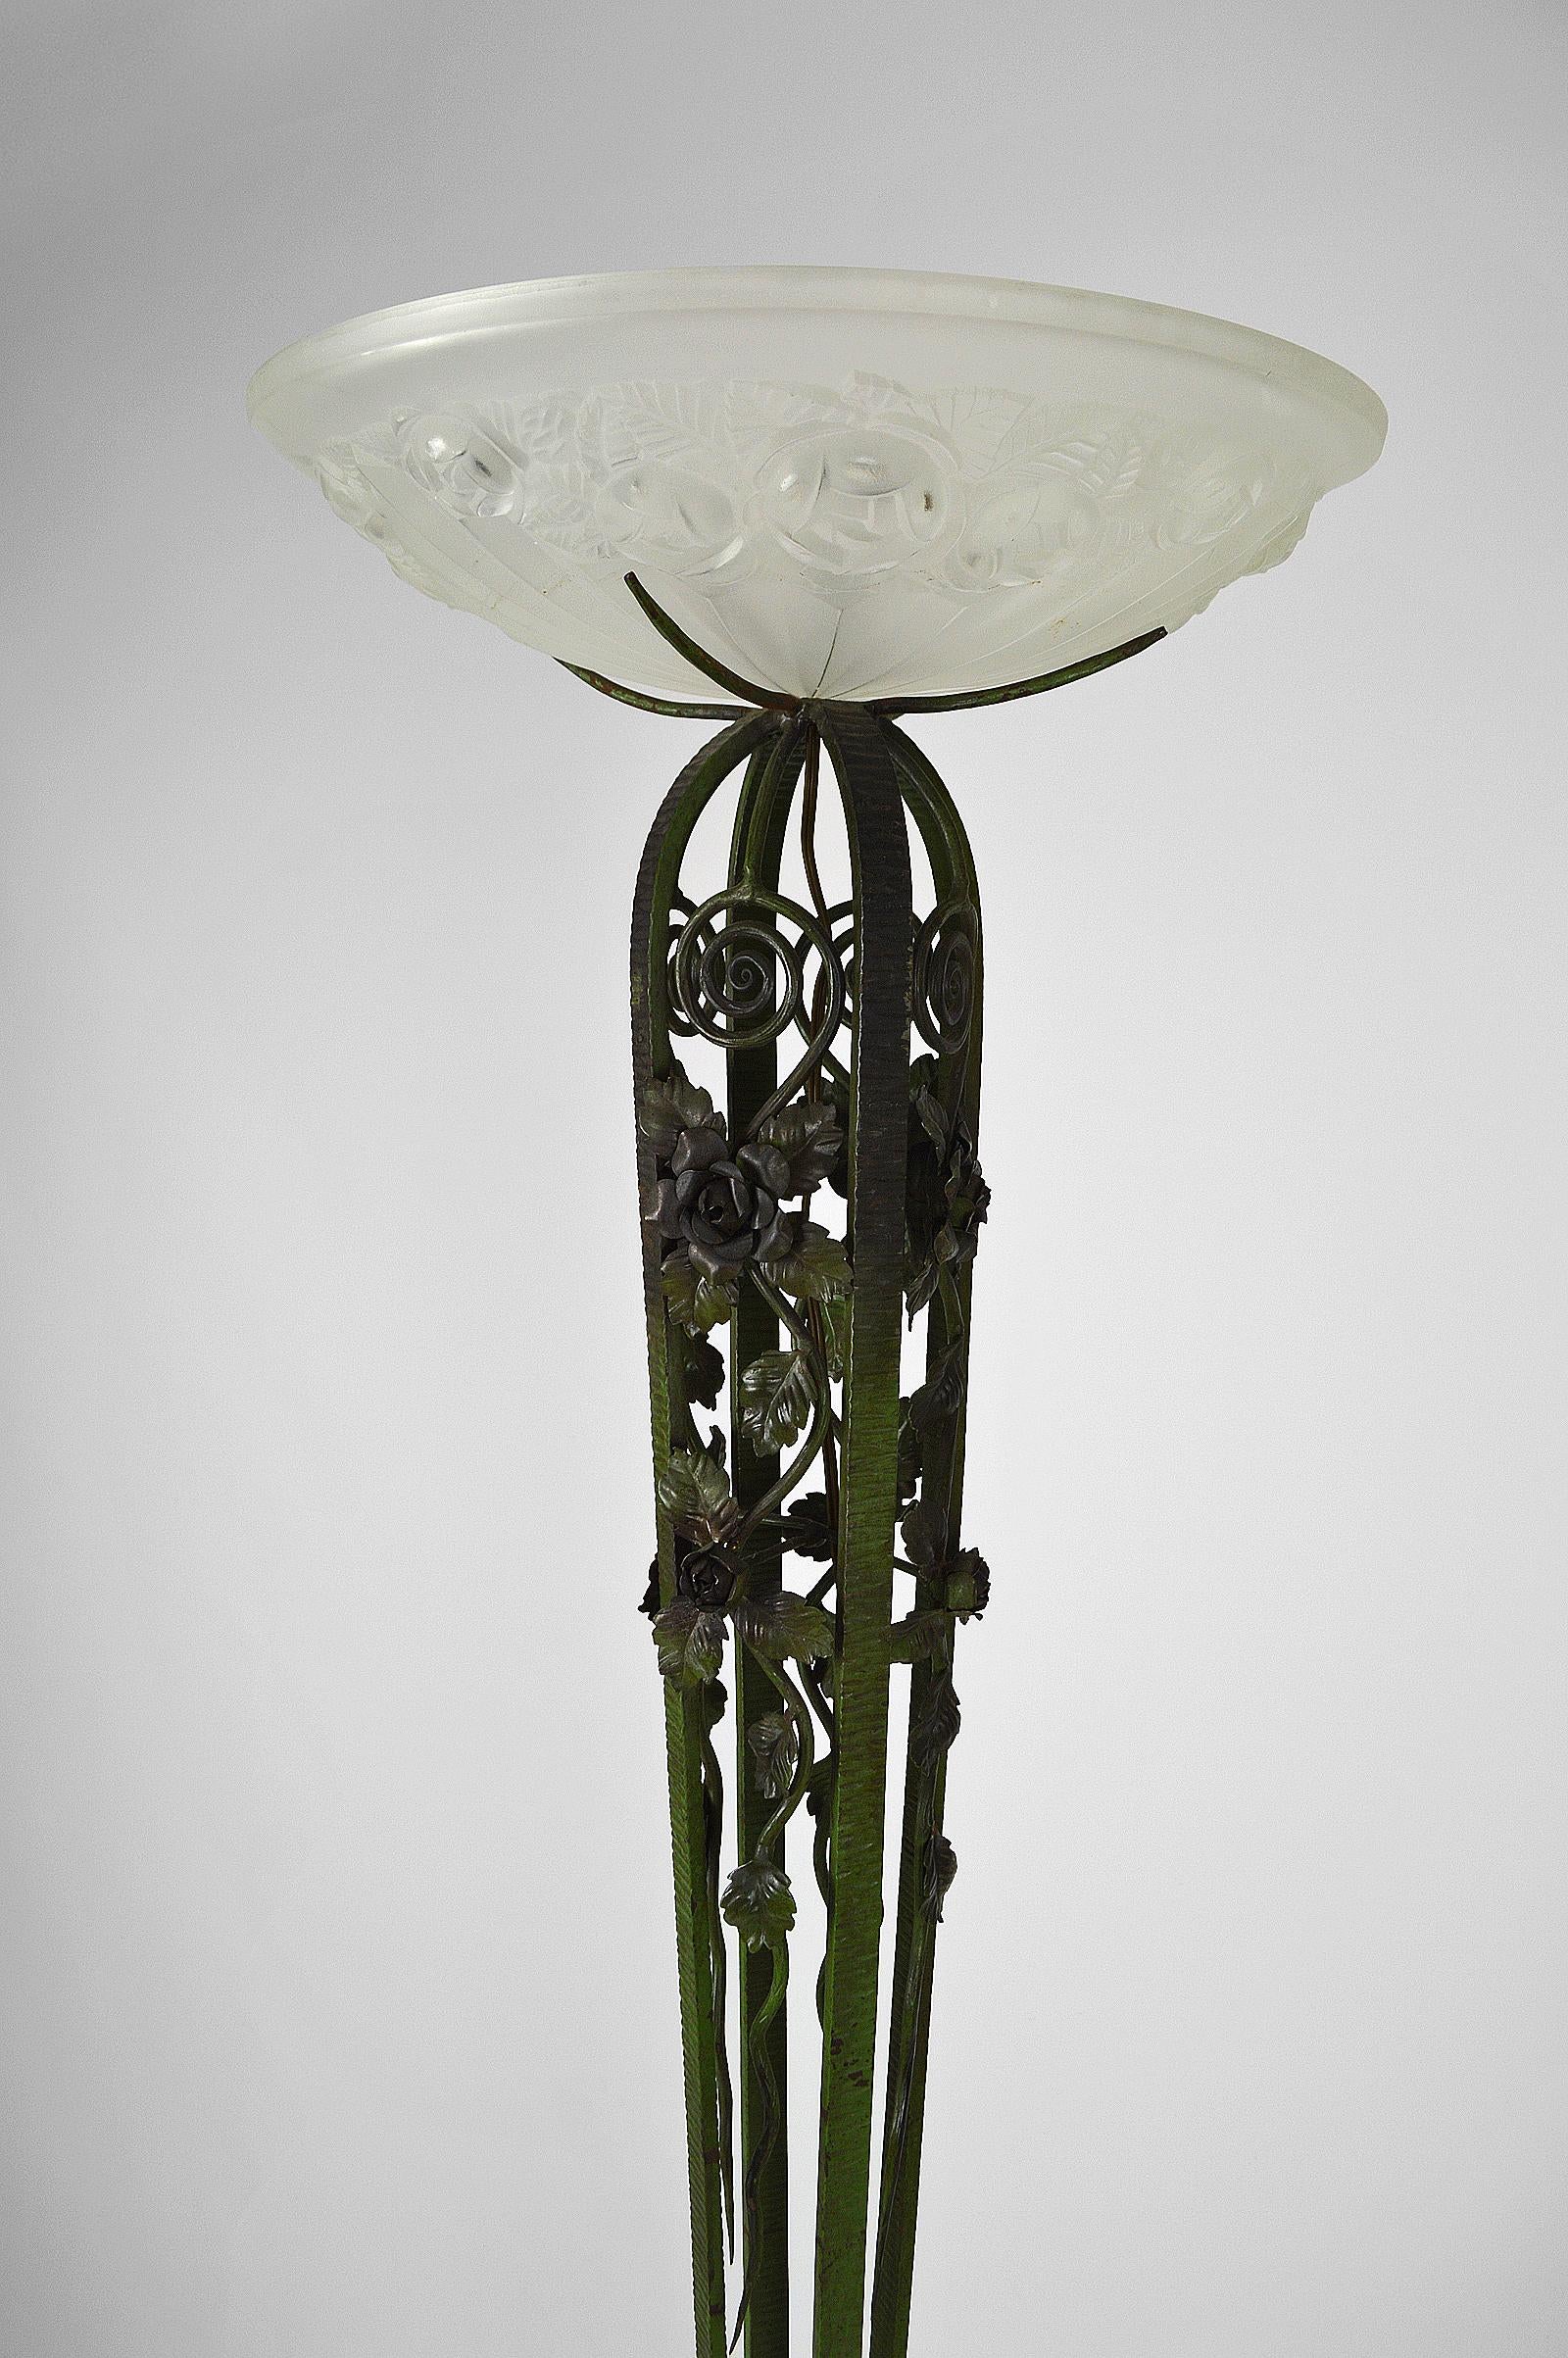 Metal Art Deco Floor Lamp in Wrought Iron and Green Patina, France, circa 1930 For Sale